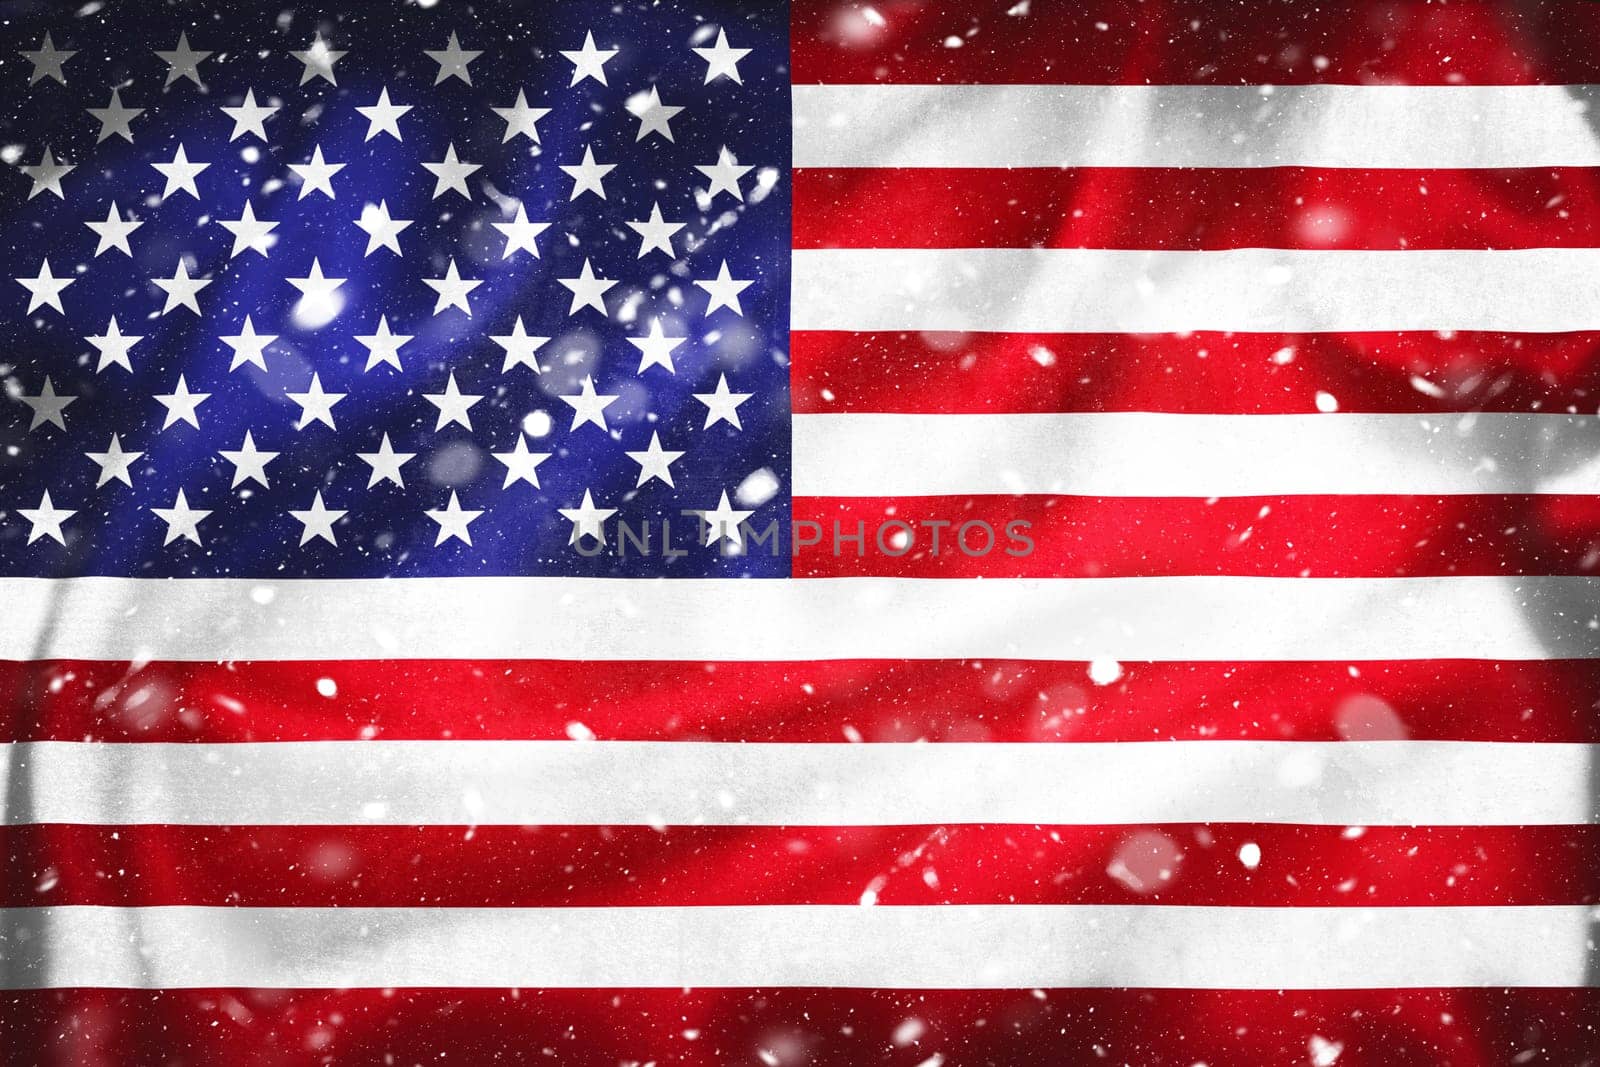 Grunge illustration of US flag with snow flakes, concept of United stares of America in winter